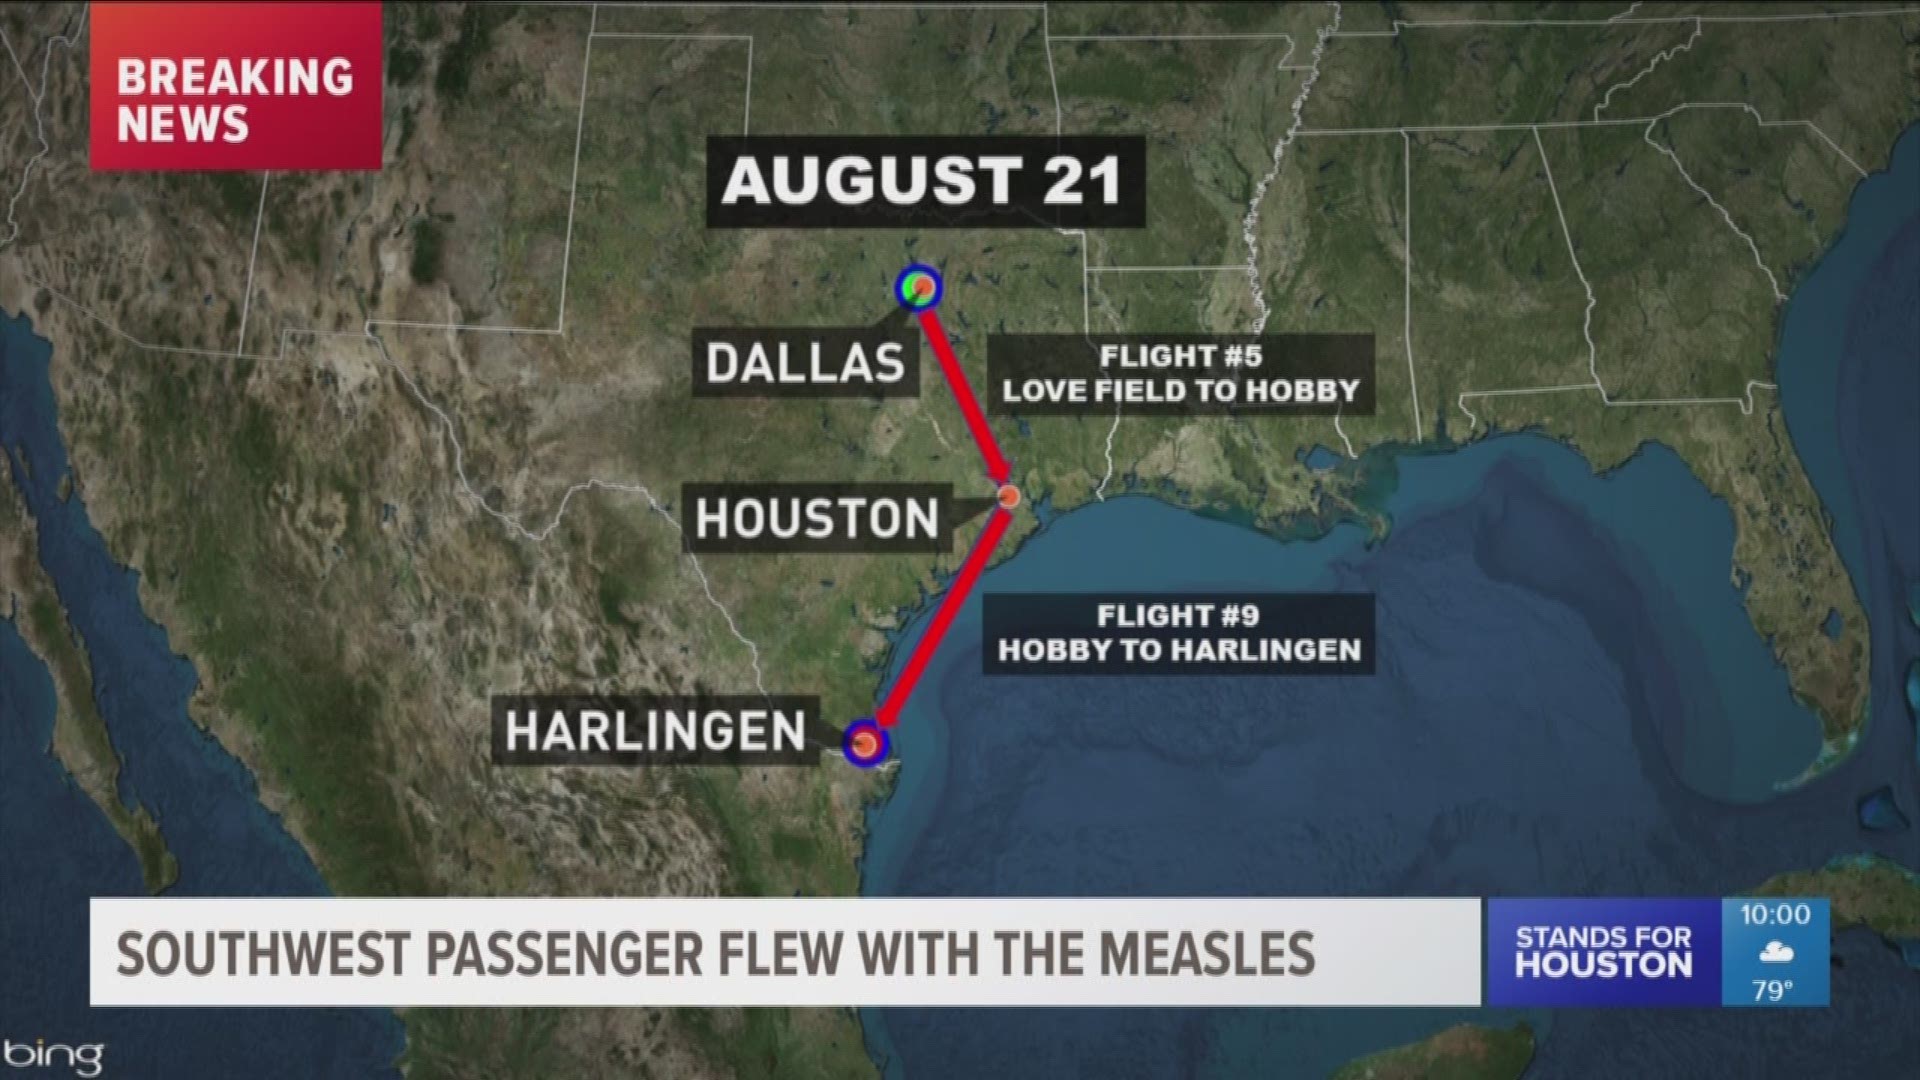 The Houston Health Department (HHD) is working with Southwest Airlines in the investigation of a case of measles involving a north Texas resident who recently connected flights in Houston.